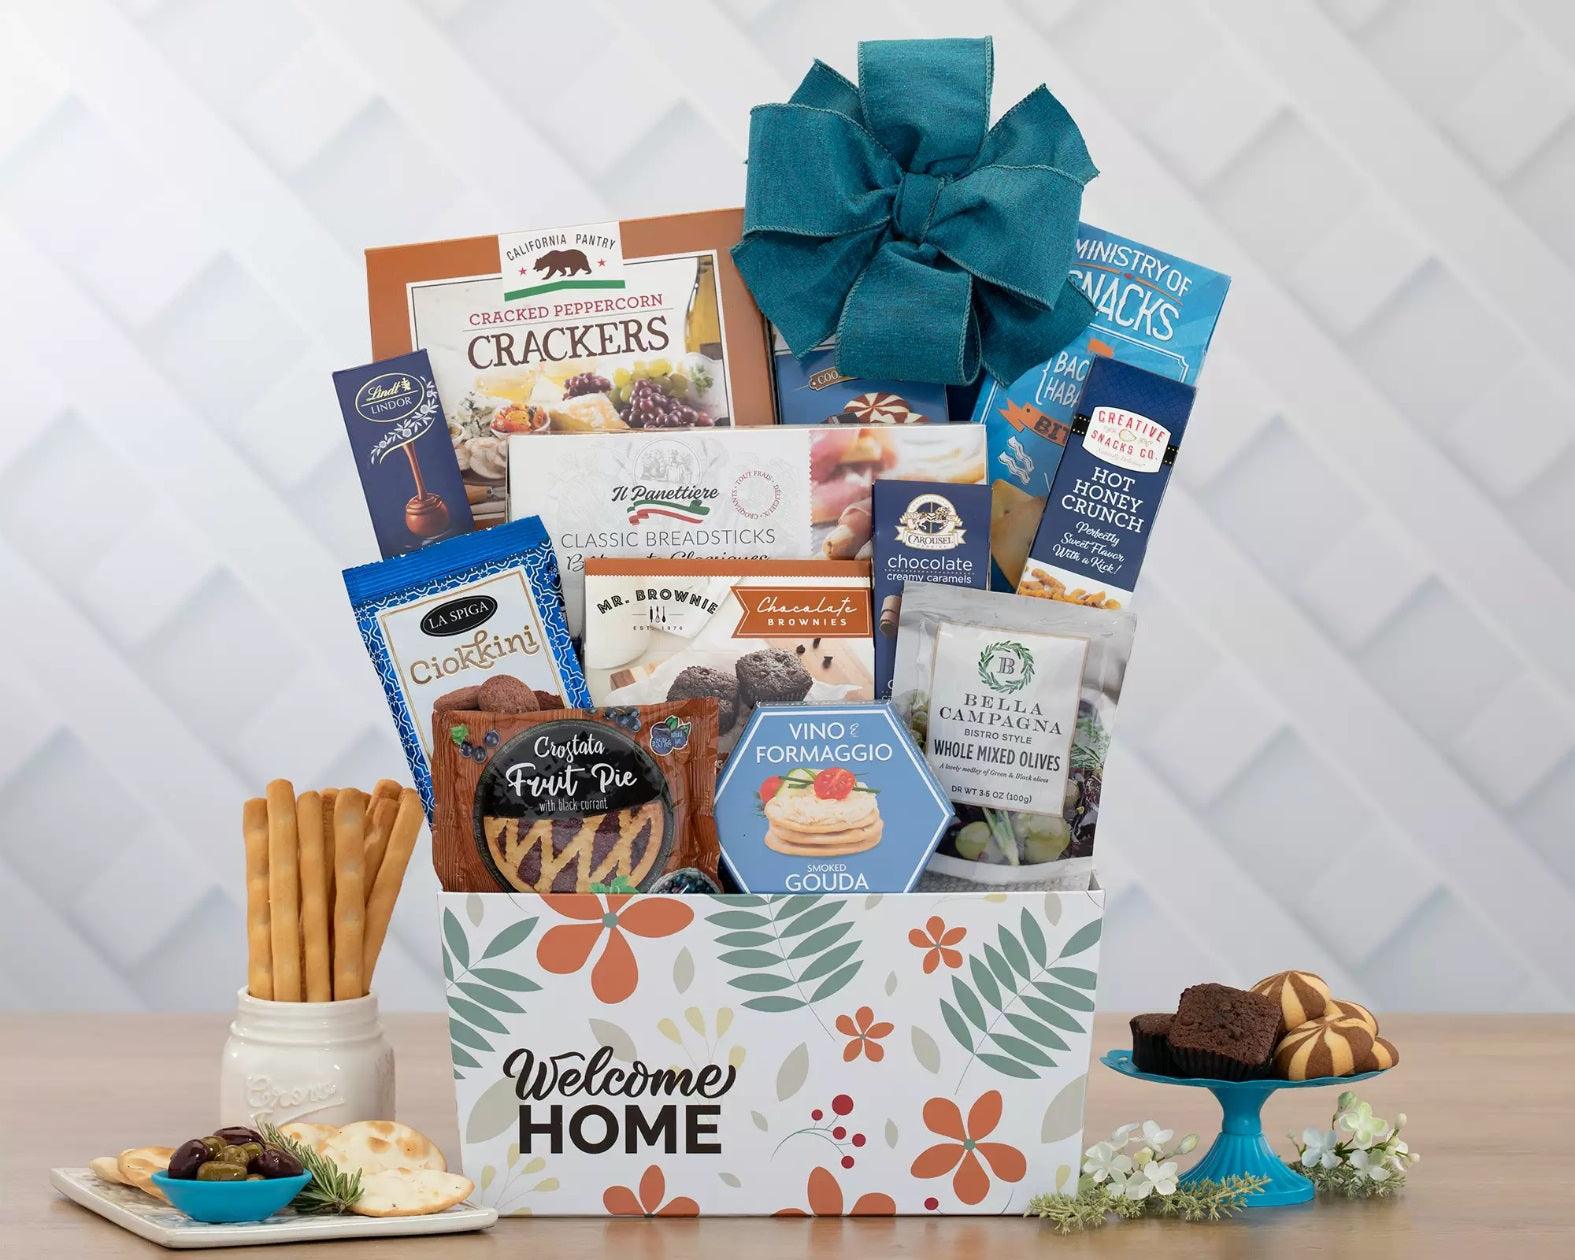 Gourmet Home Welcome Gift Box - The Gift Basket Company